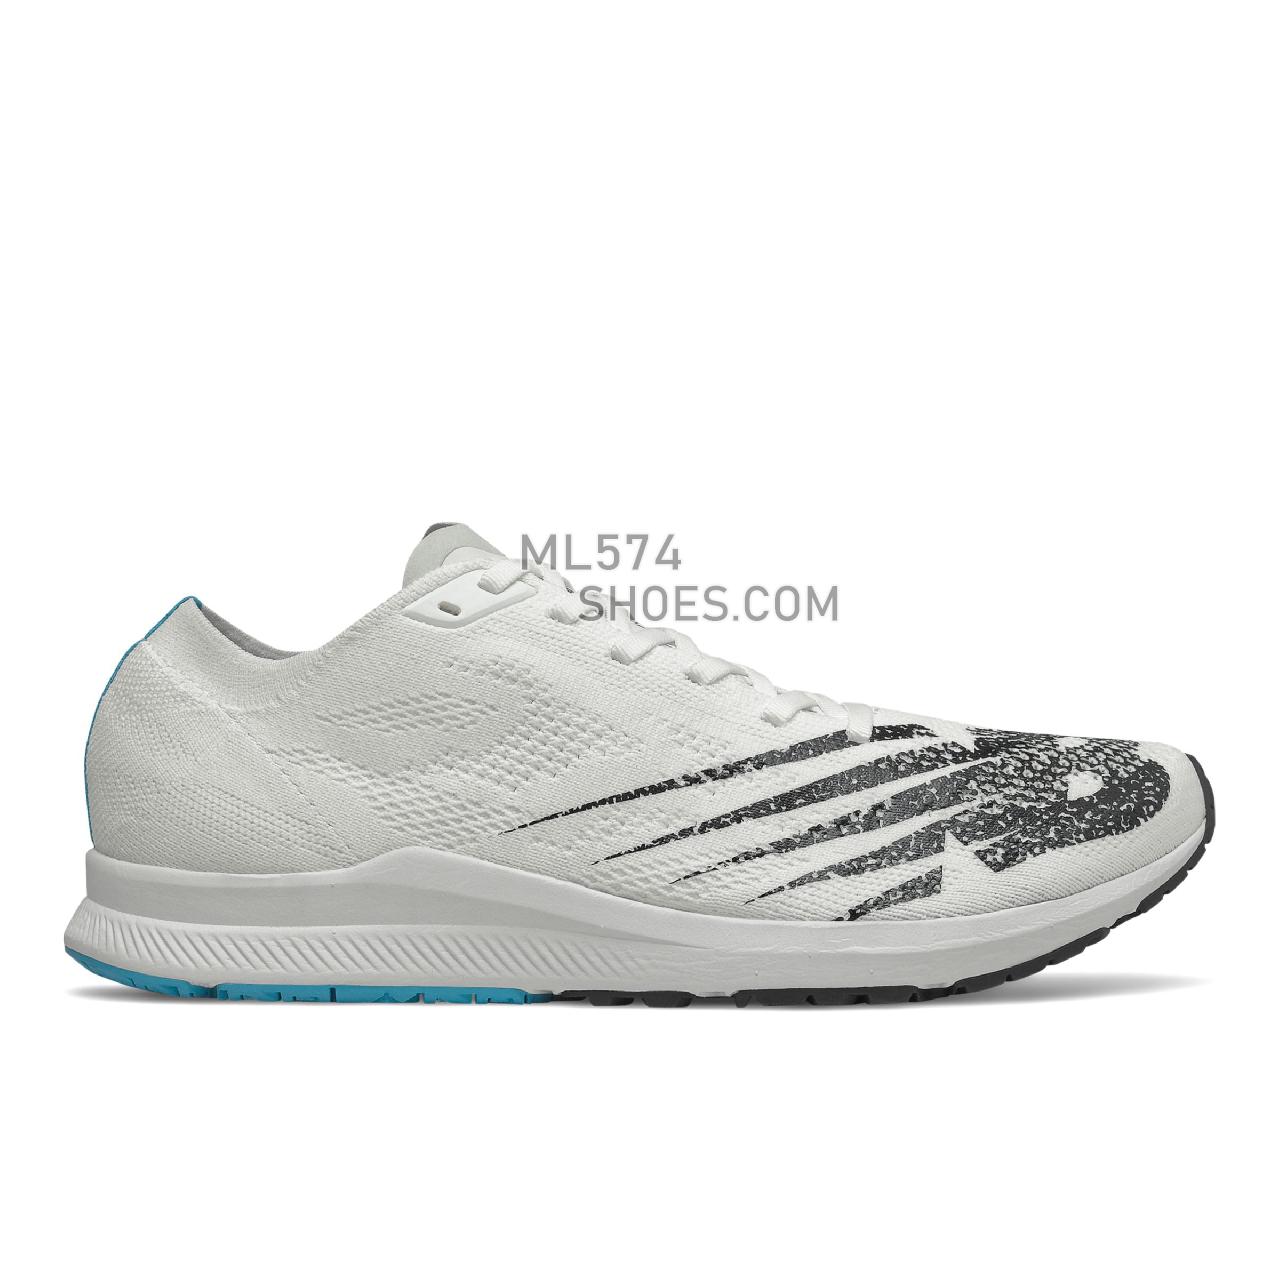 New Balance 1500v6 - Men's Competition Running - White with Virtual Sky - M1500CV6